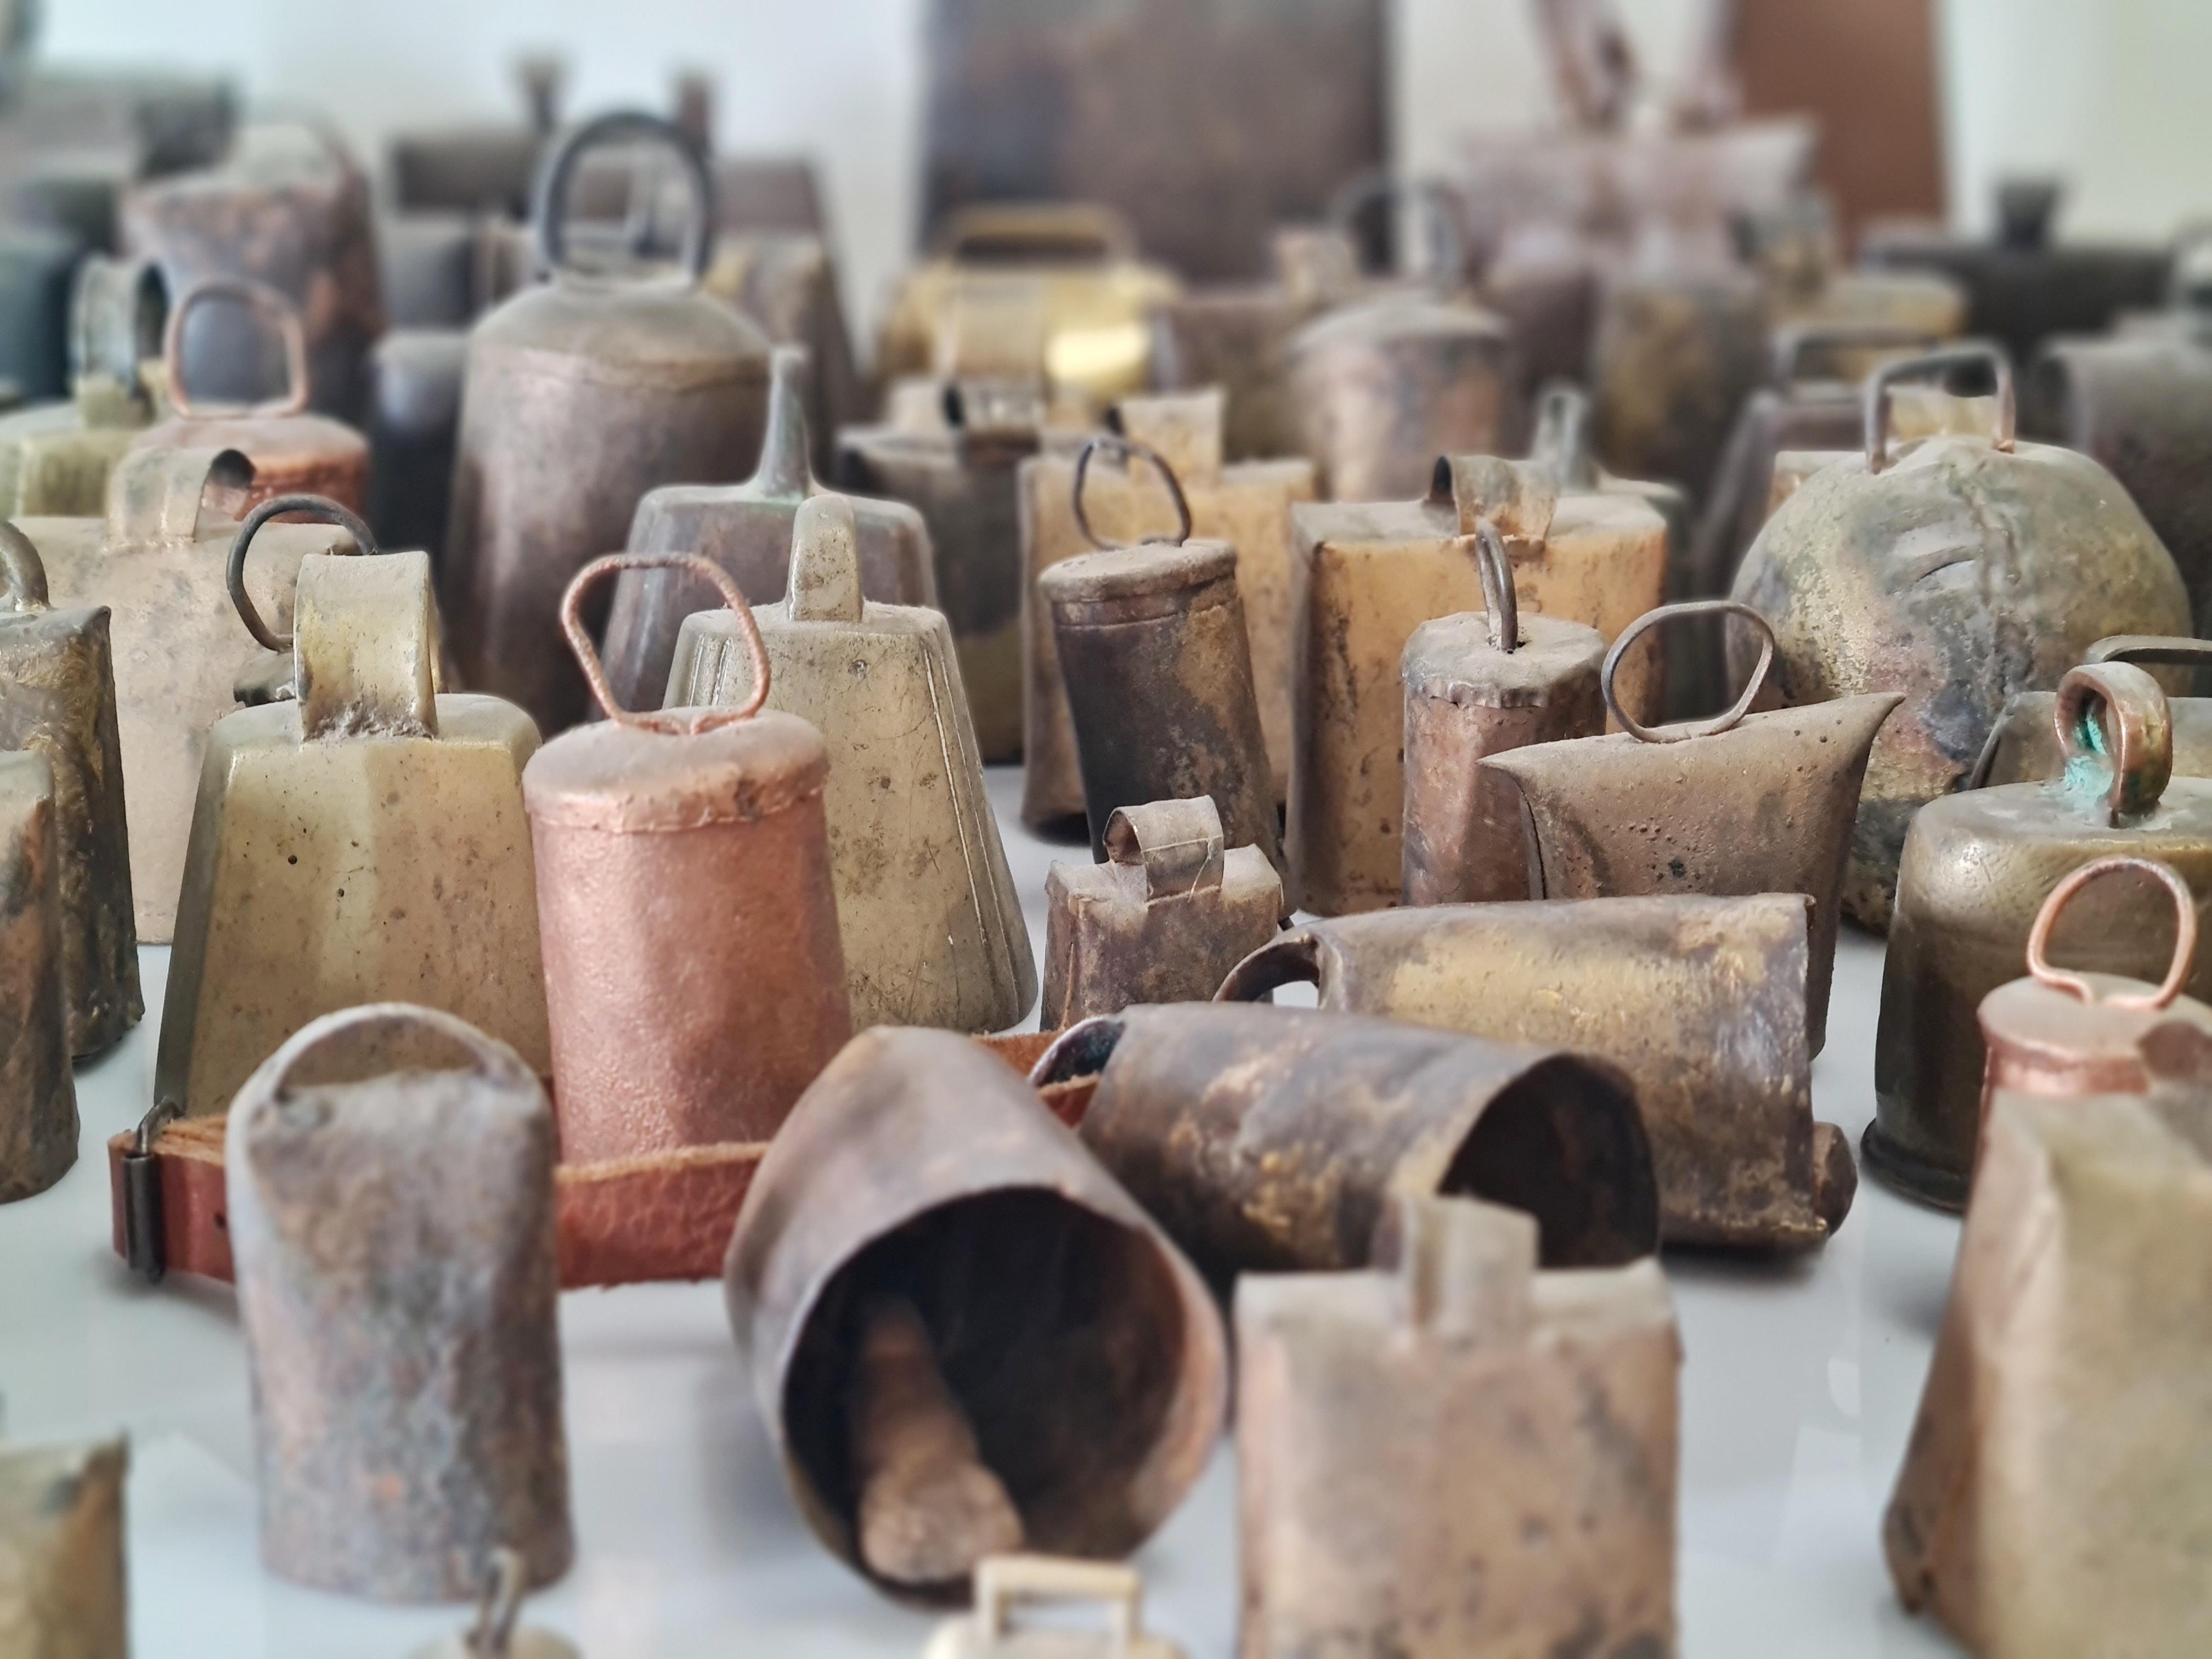 A collection of 69 cow bells that came from a recent clearance. The biggest is 18 x 16 x 8cm and the smallest around 2.5 x 1 x 1cm. Some are cast brass bells and some sheet welded. Some have cracks and some in good condition. Mostly Finnish from the